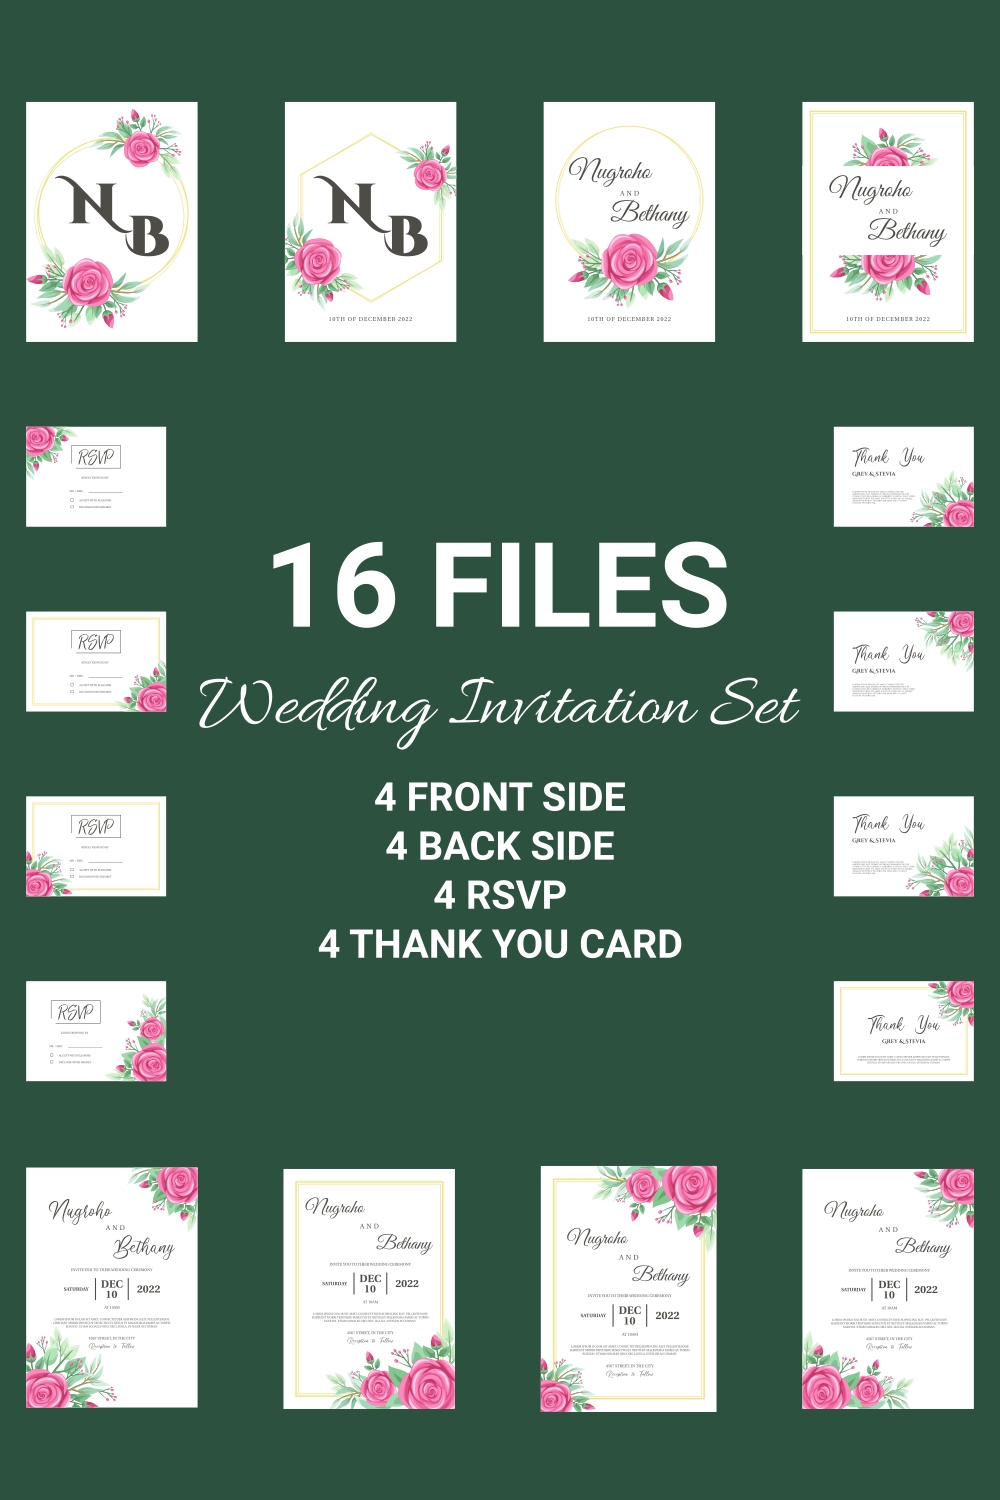 Greenery Wedding Invitation Template With Rose Ornament Pinterest Image.